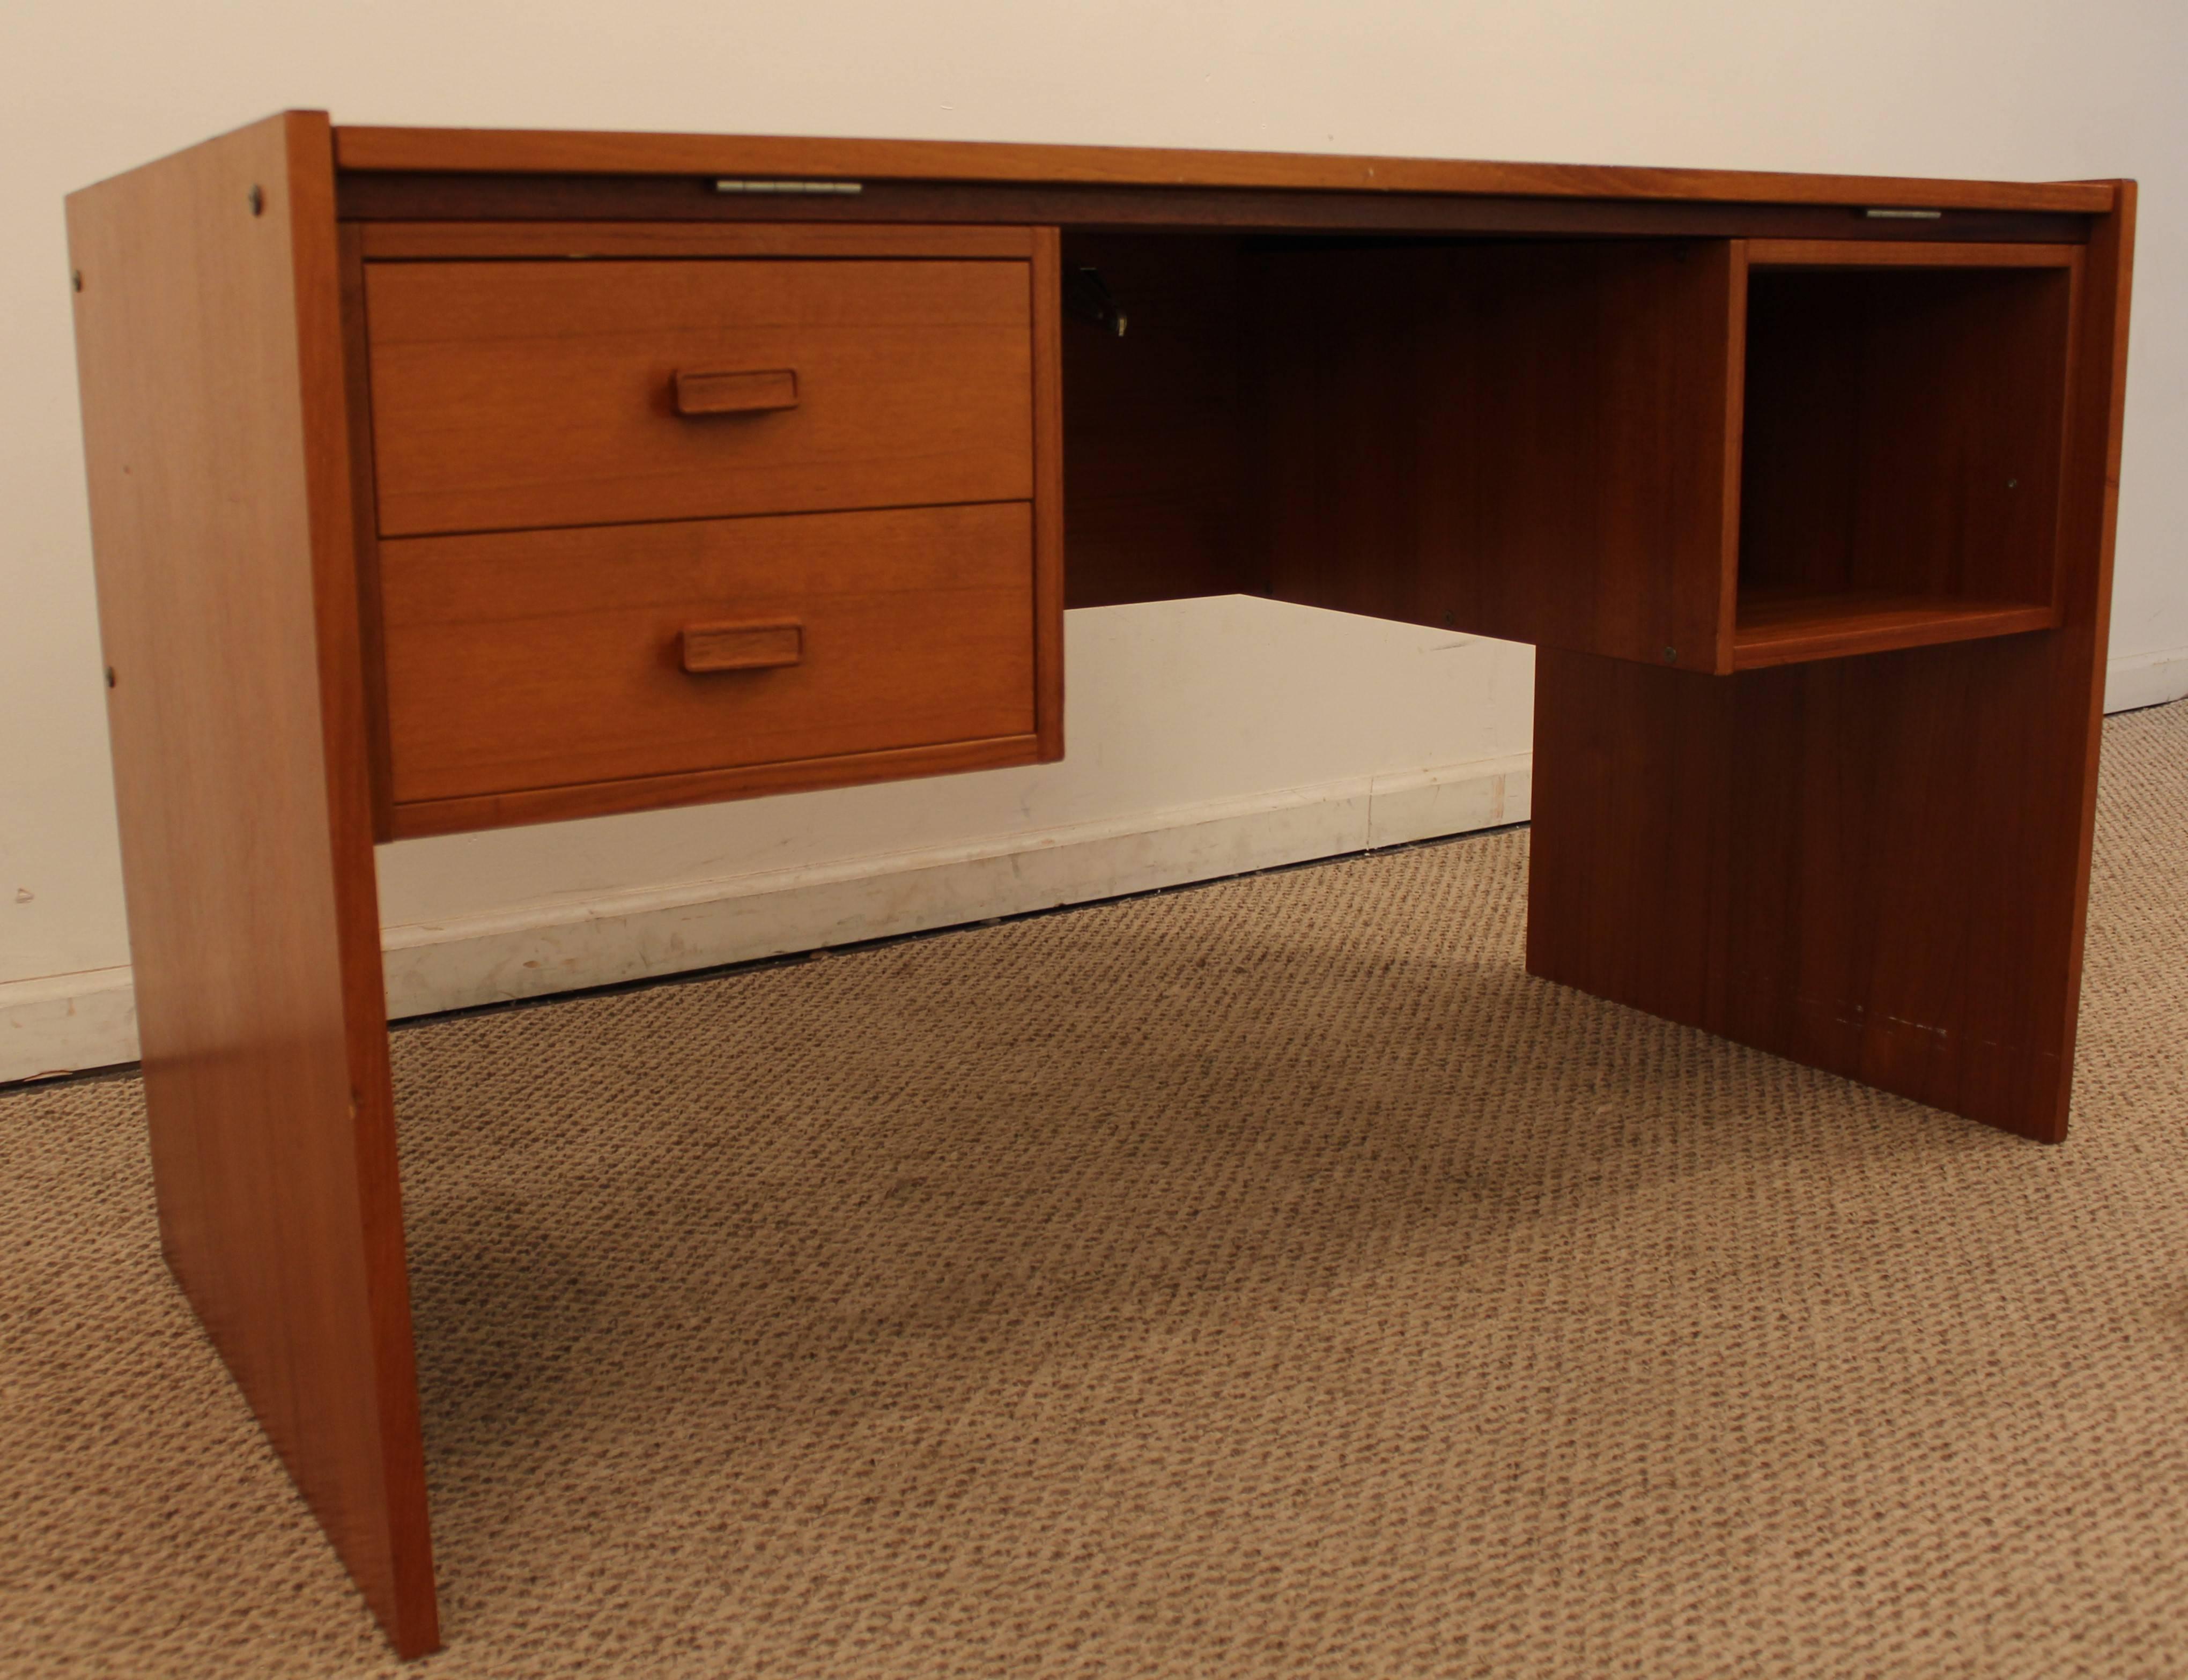 Offered is a desk by Trenkanten. It is made of teak and has a tilt-top, in working order.

Dimensions:
51.25